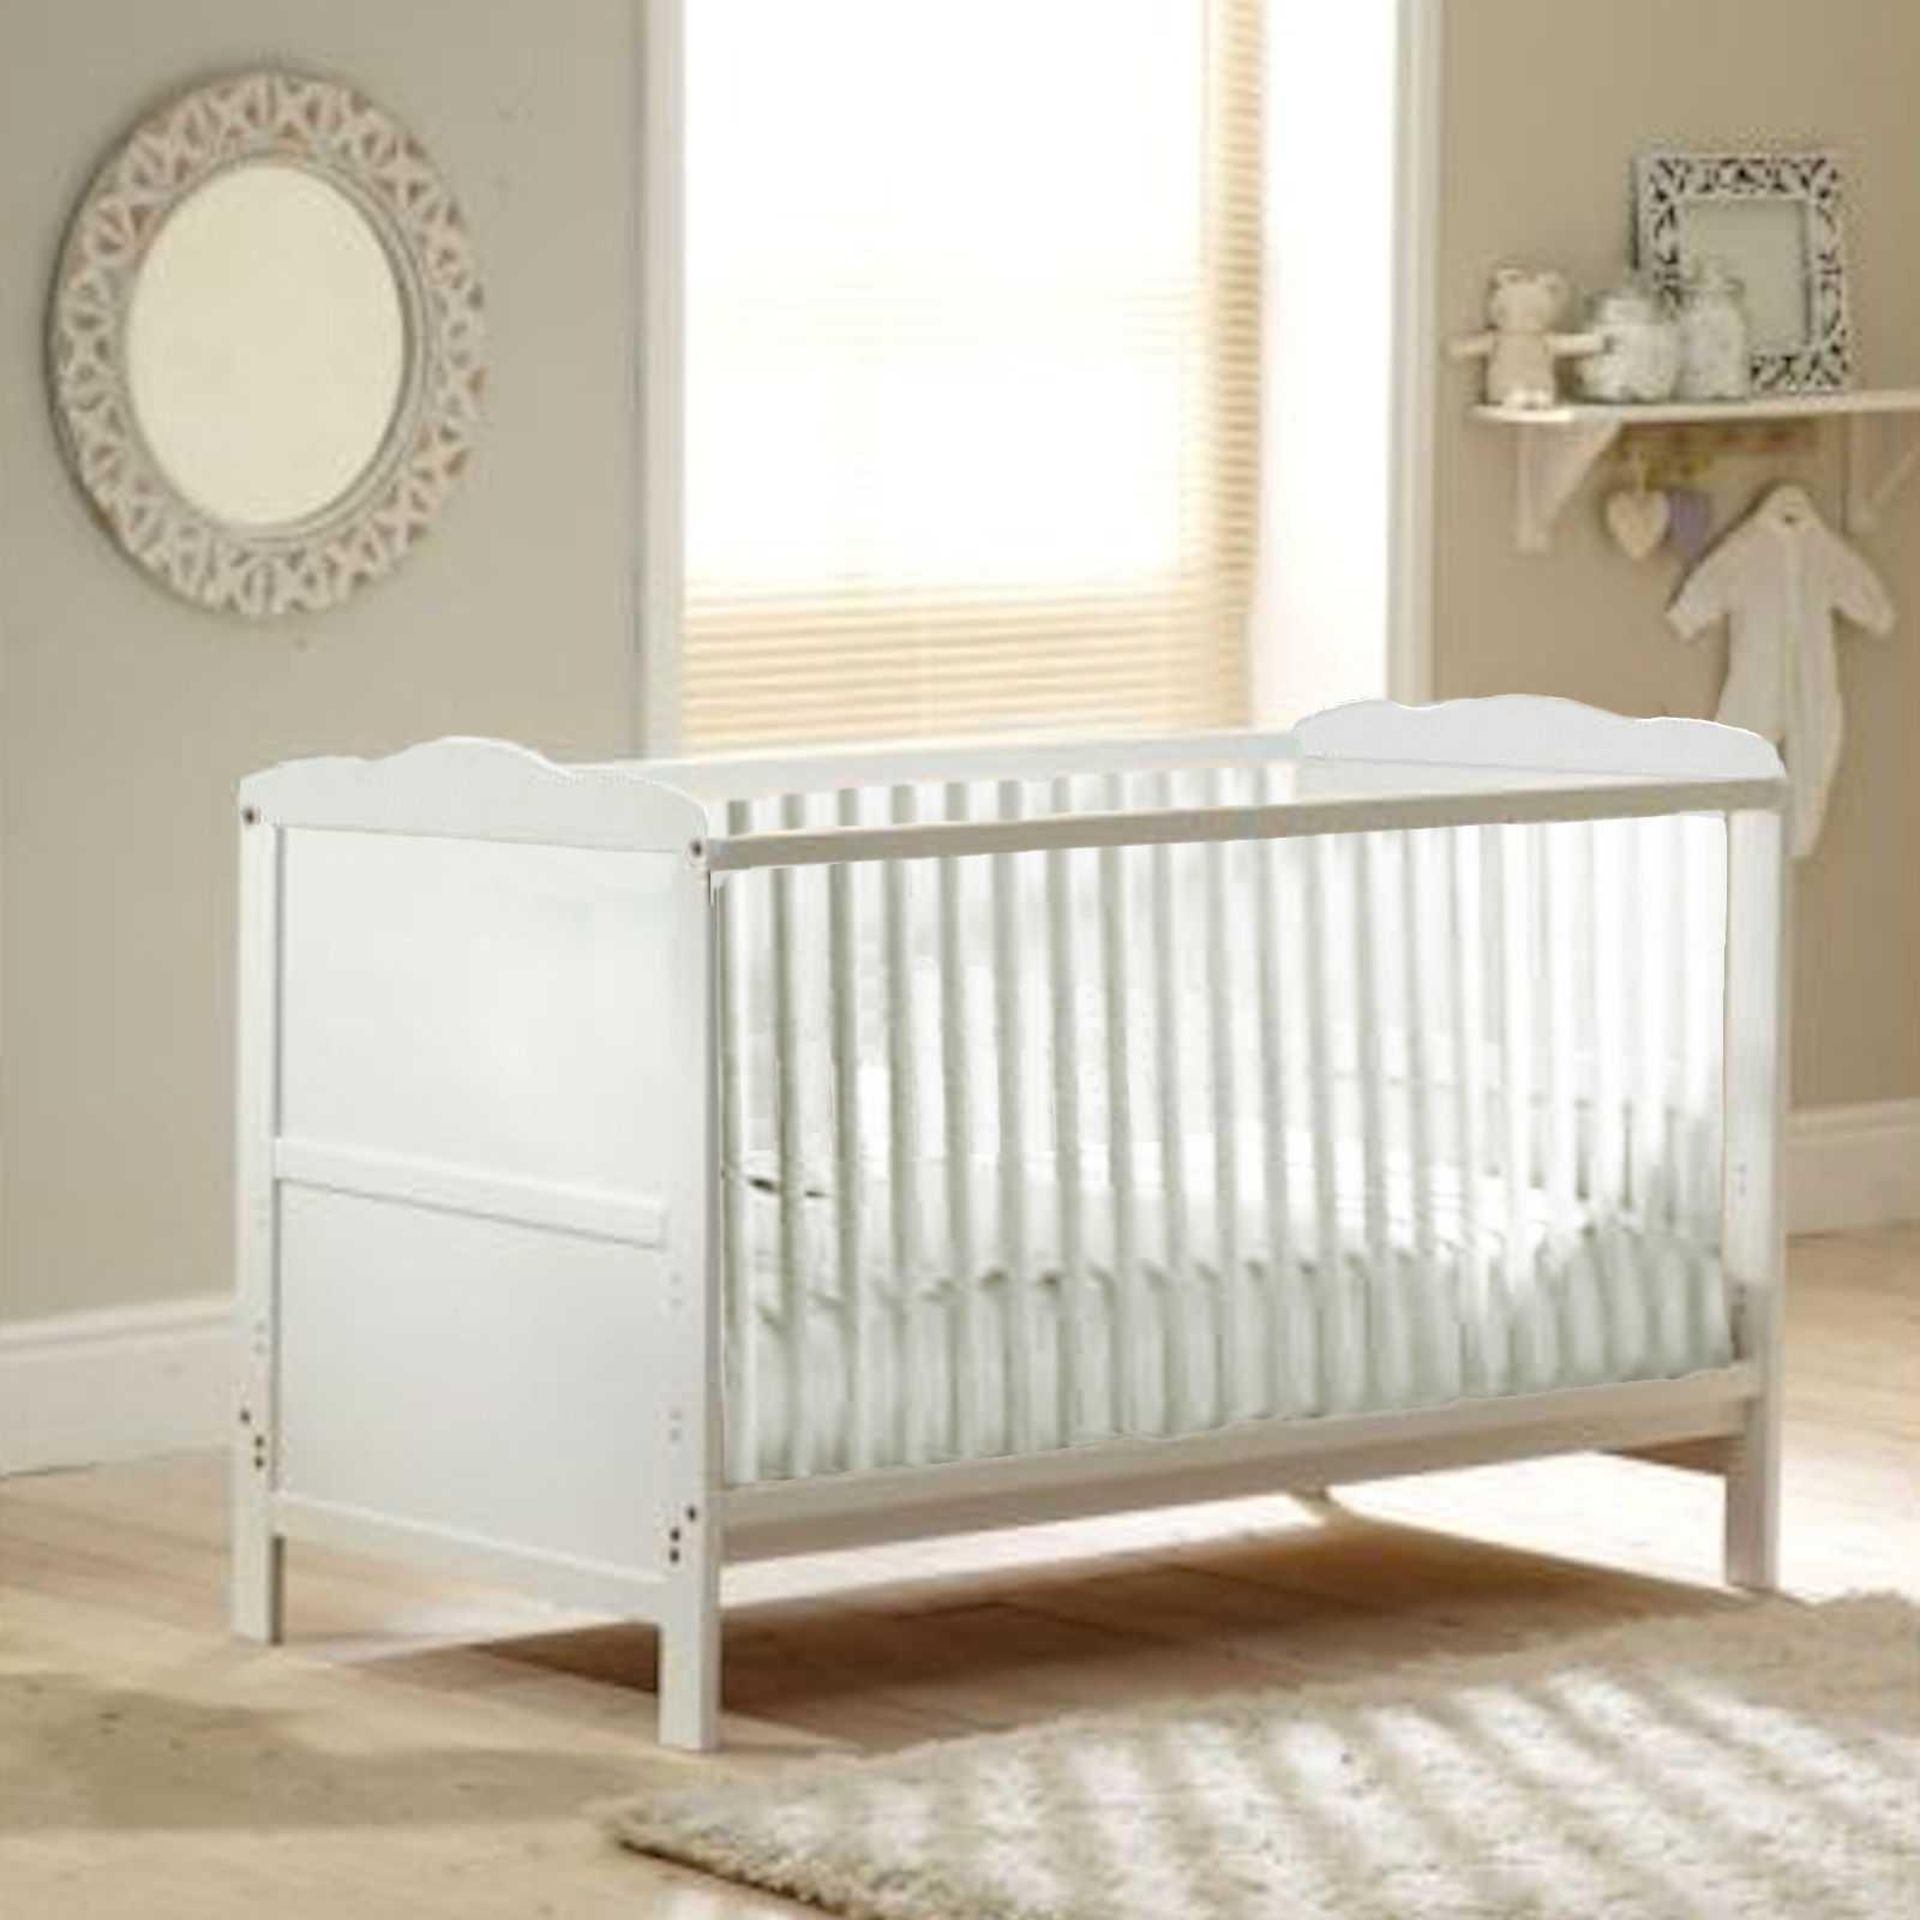 RRP £149 Boxed Classic Solid Wooden White Designer Cot Bed (Appraisals Available Upon Request) (